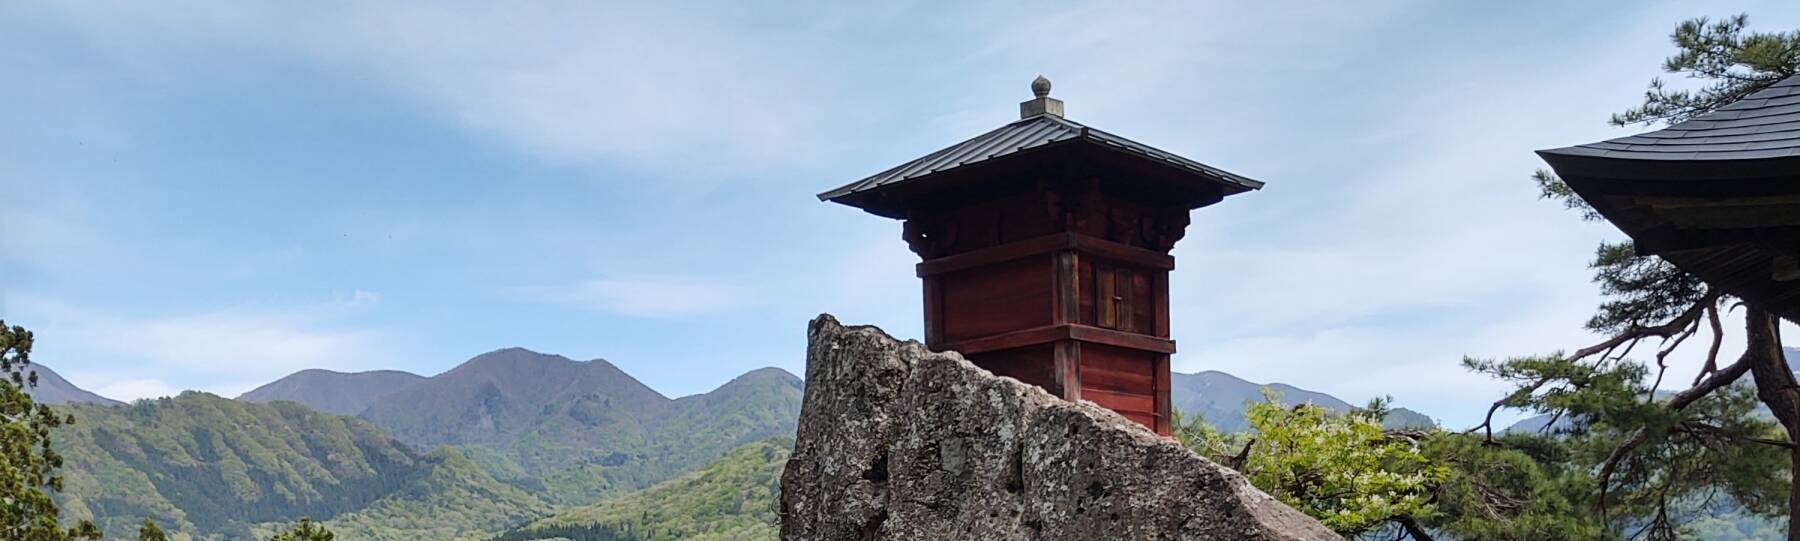 Sutra repository on a rock peak at Yamadera, overlooking the valley and the mountains to the south.